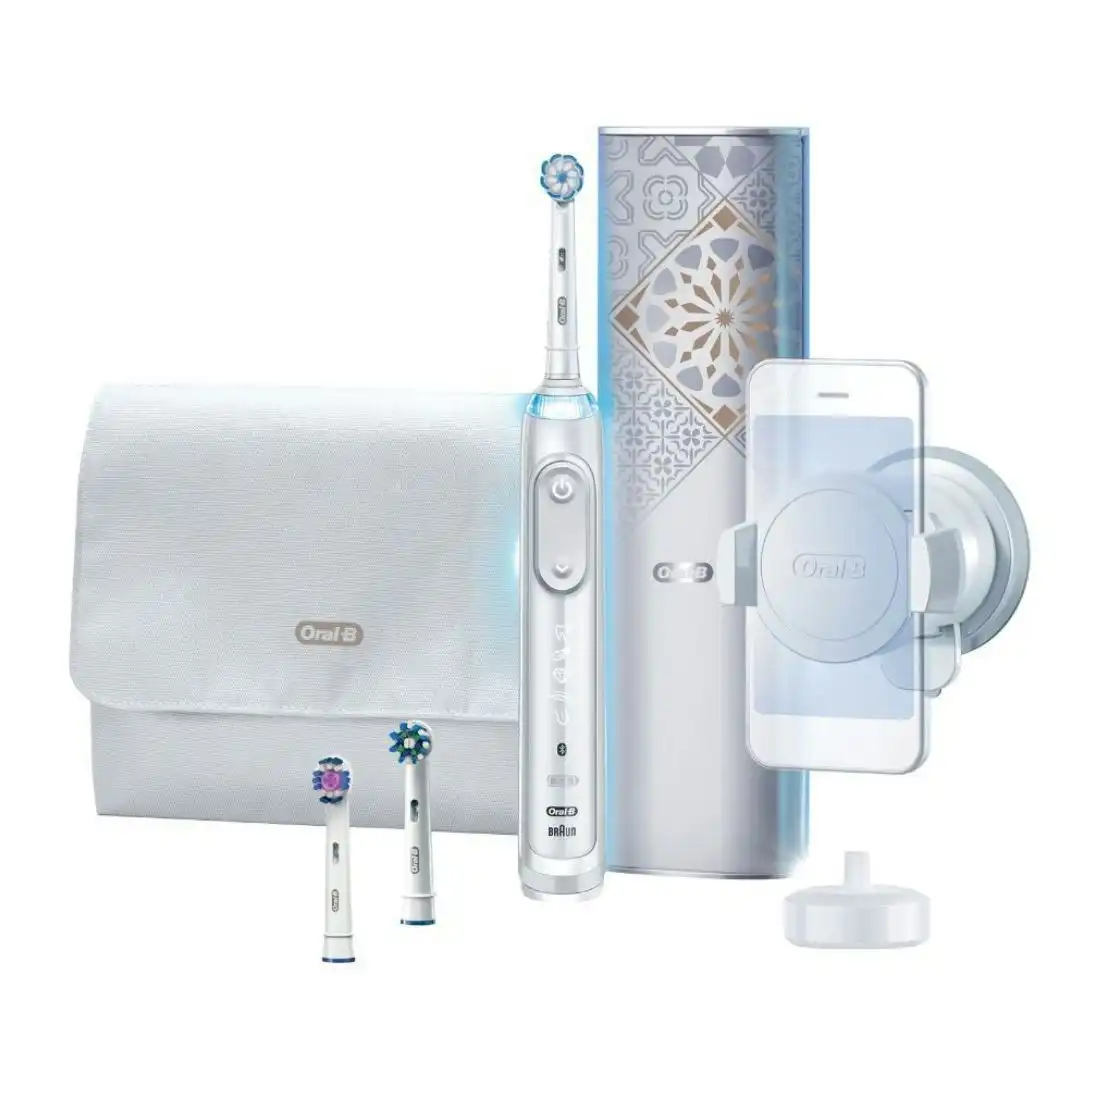 Oral-B Genius AI 10000 Electric Toothbrush with 3 Replacement Heads & Smart Travel Case - White